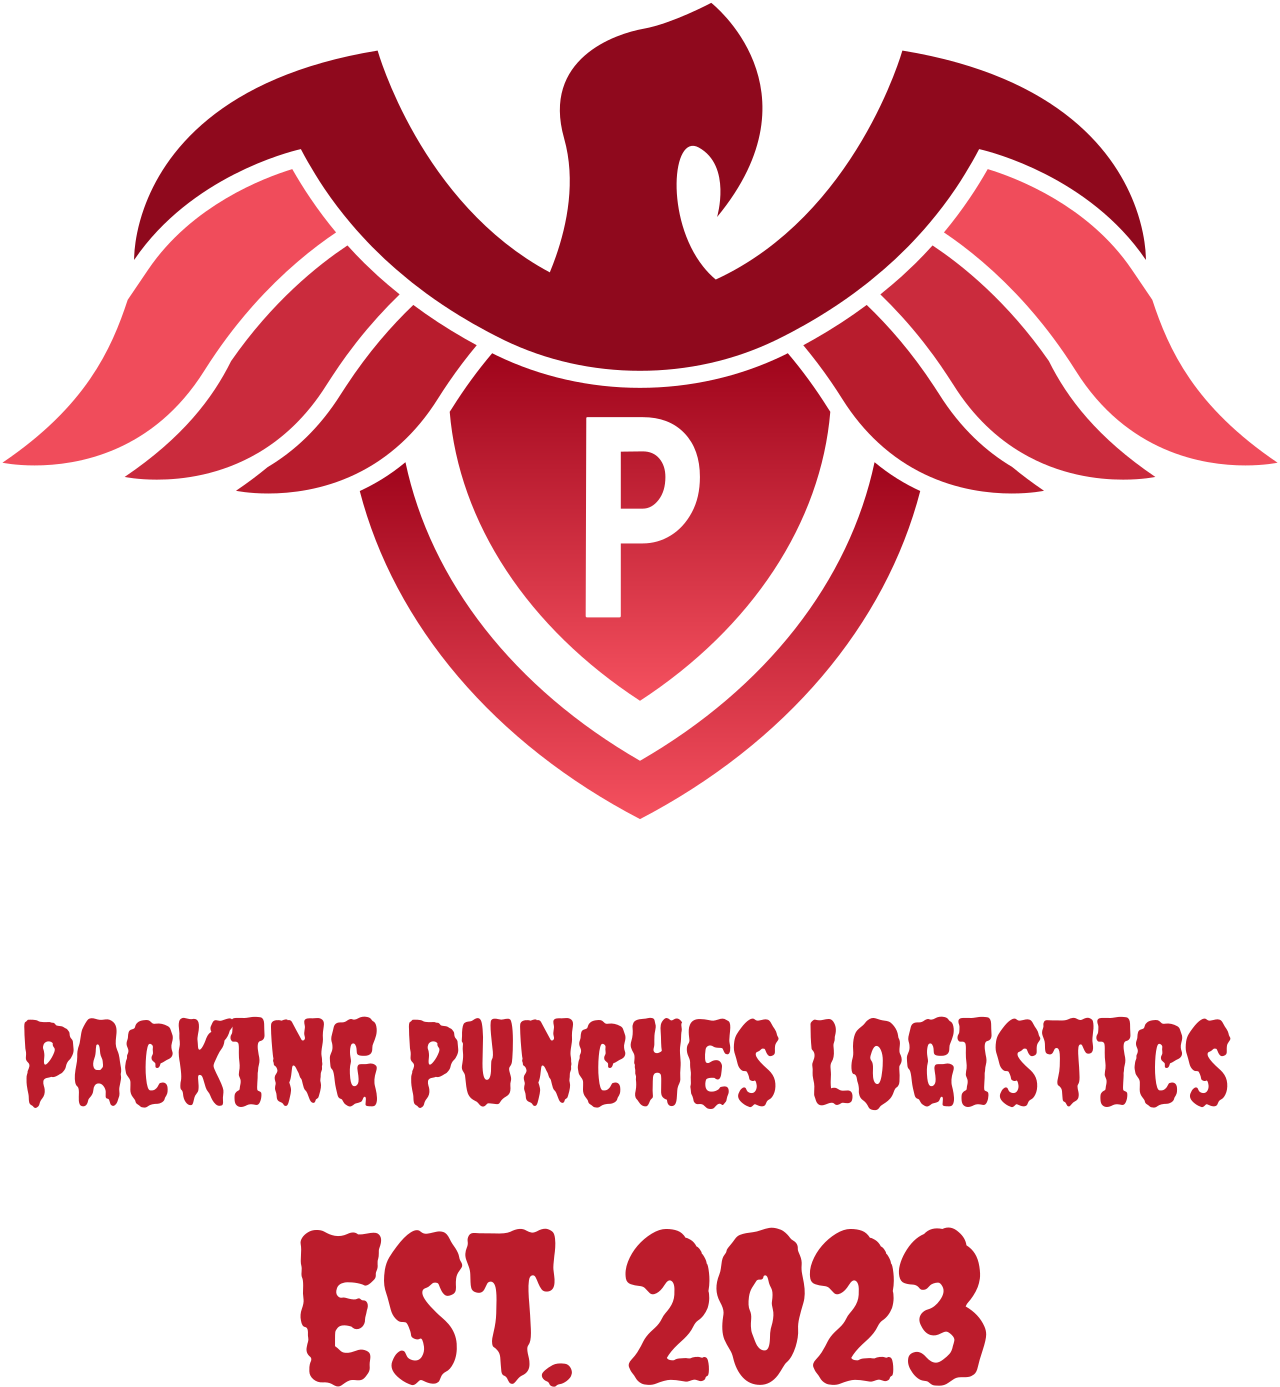 Packing Punches Logistics 's web page